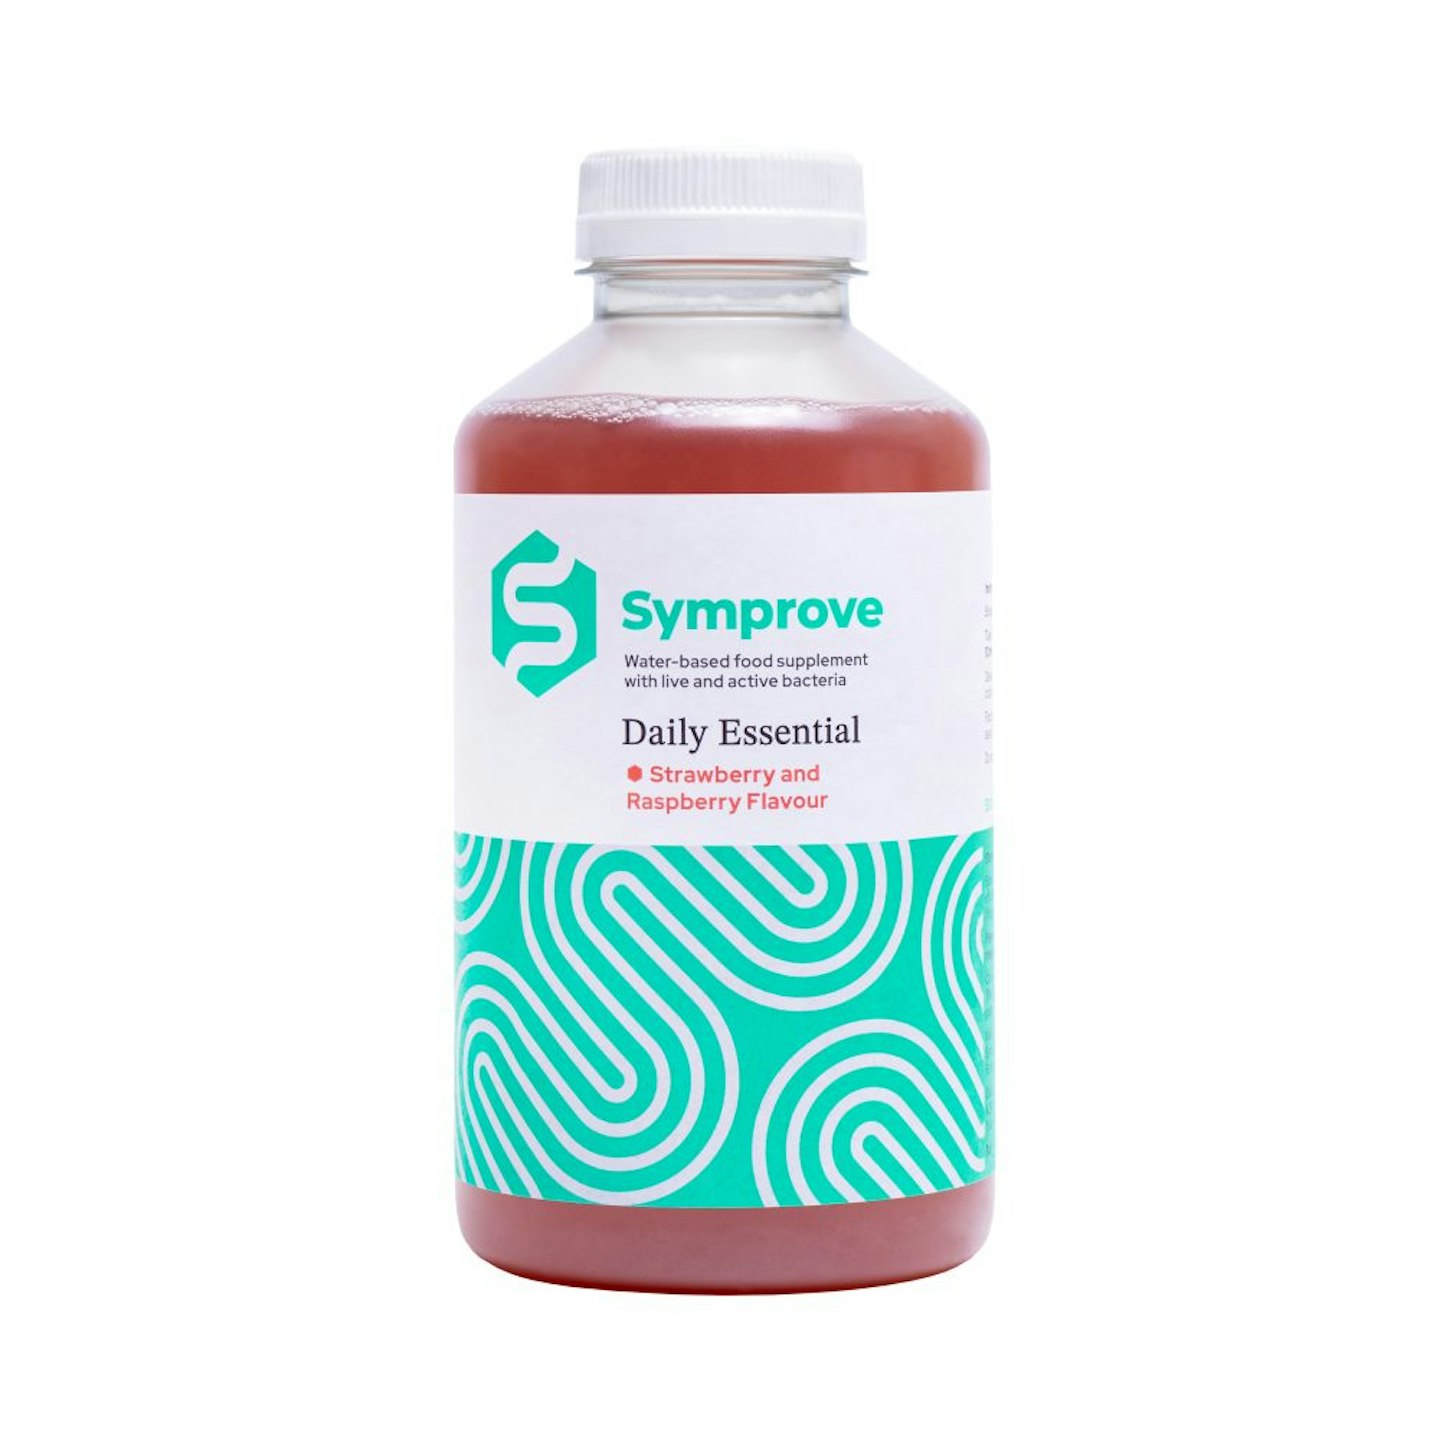 Symprove Daily Essential morning sickness